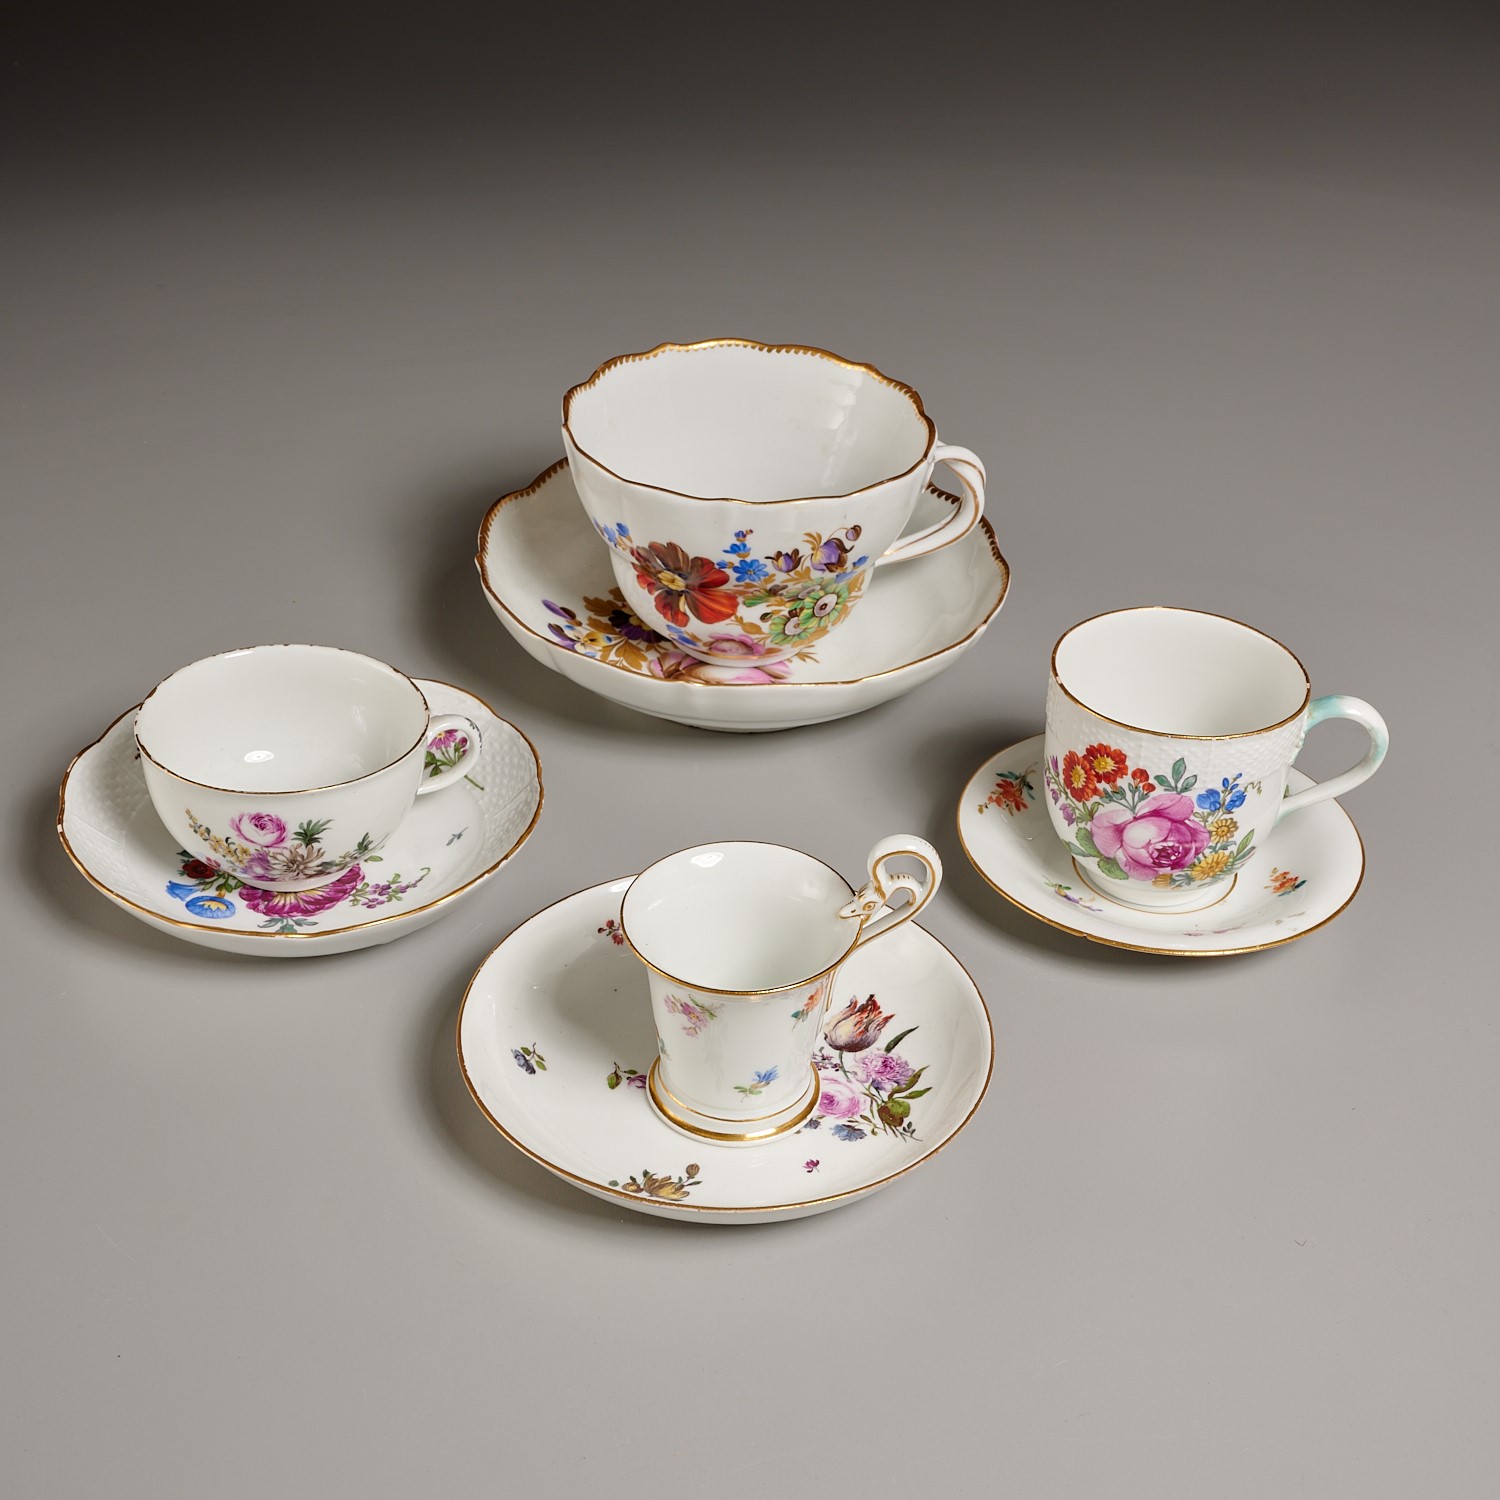  4 MEISSEN FLORAL CUPS AND SAUCERS 2a5fc5